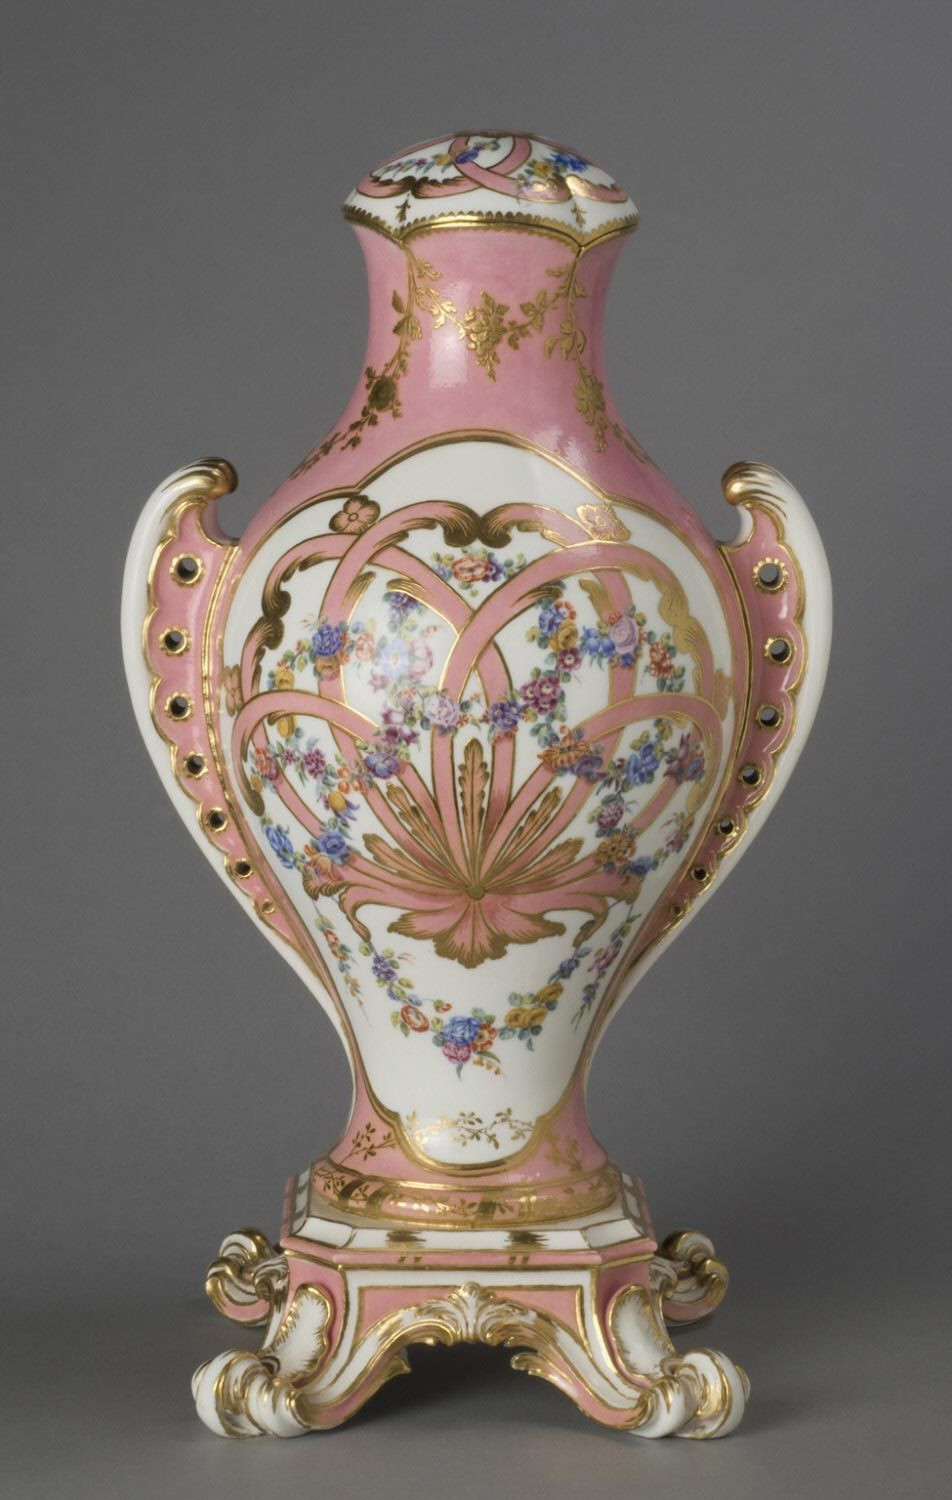 10 Fashionable Vintage Pink Ceramic Vase 2024 free download vintage pink ceramic vase of vase with lid made by the sac2a8vres porcelain factory 1757 i have not inside vase with lid made by the sac2a8vres porcelain factory 1757 i have not seen to many